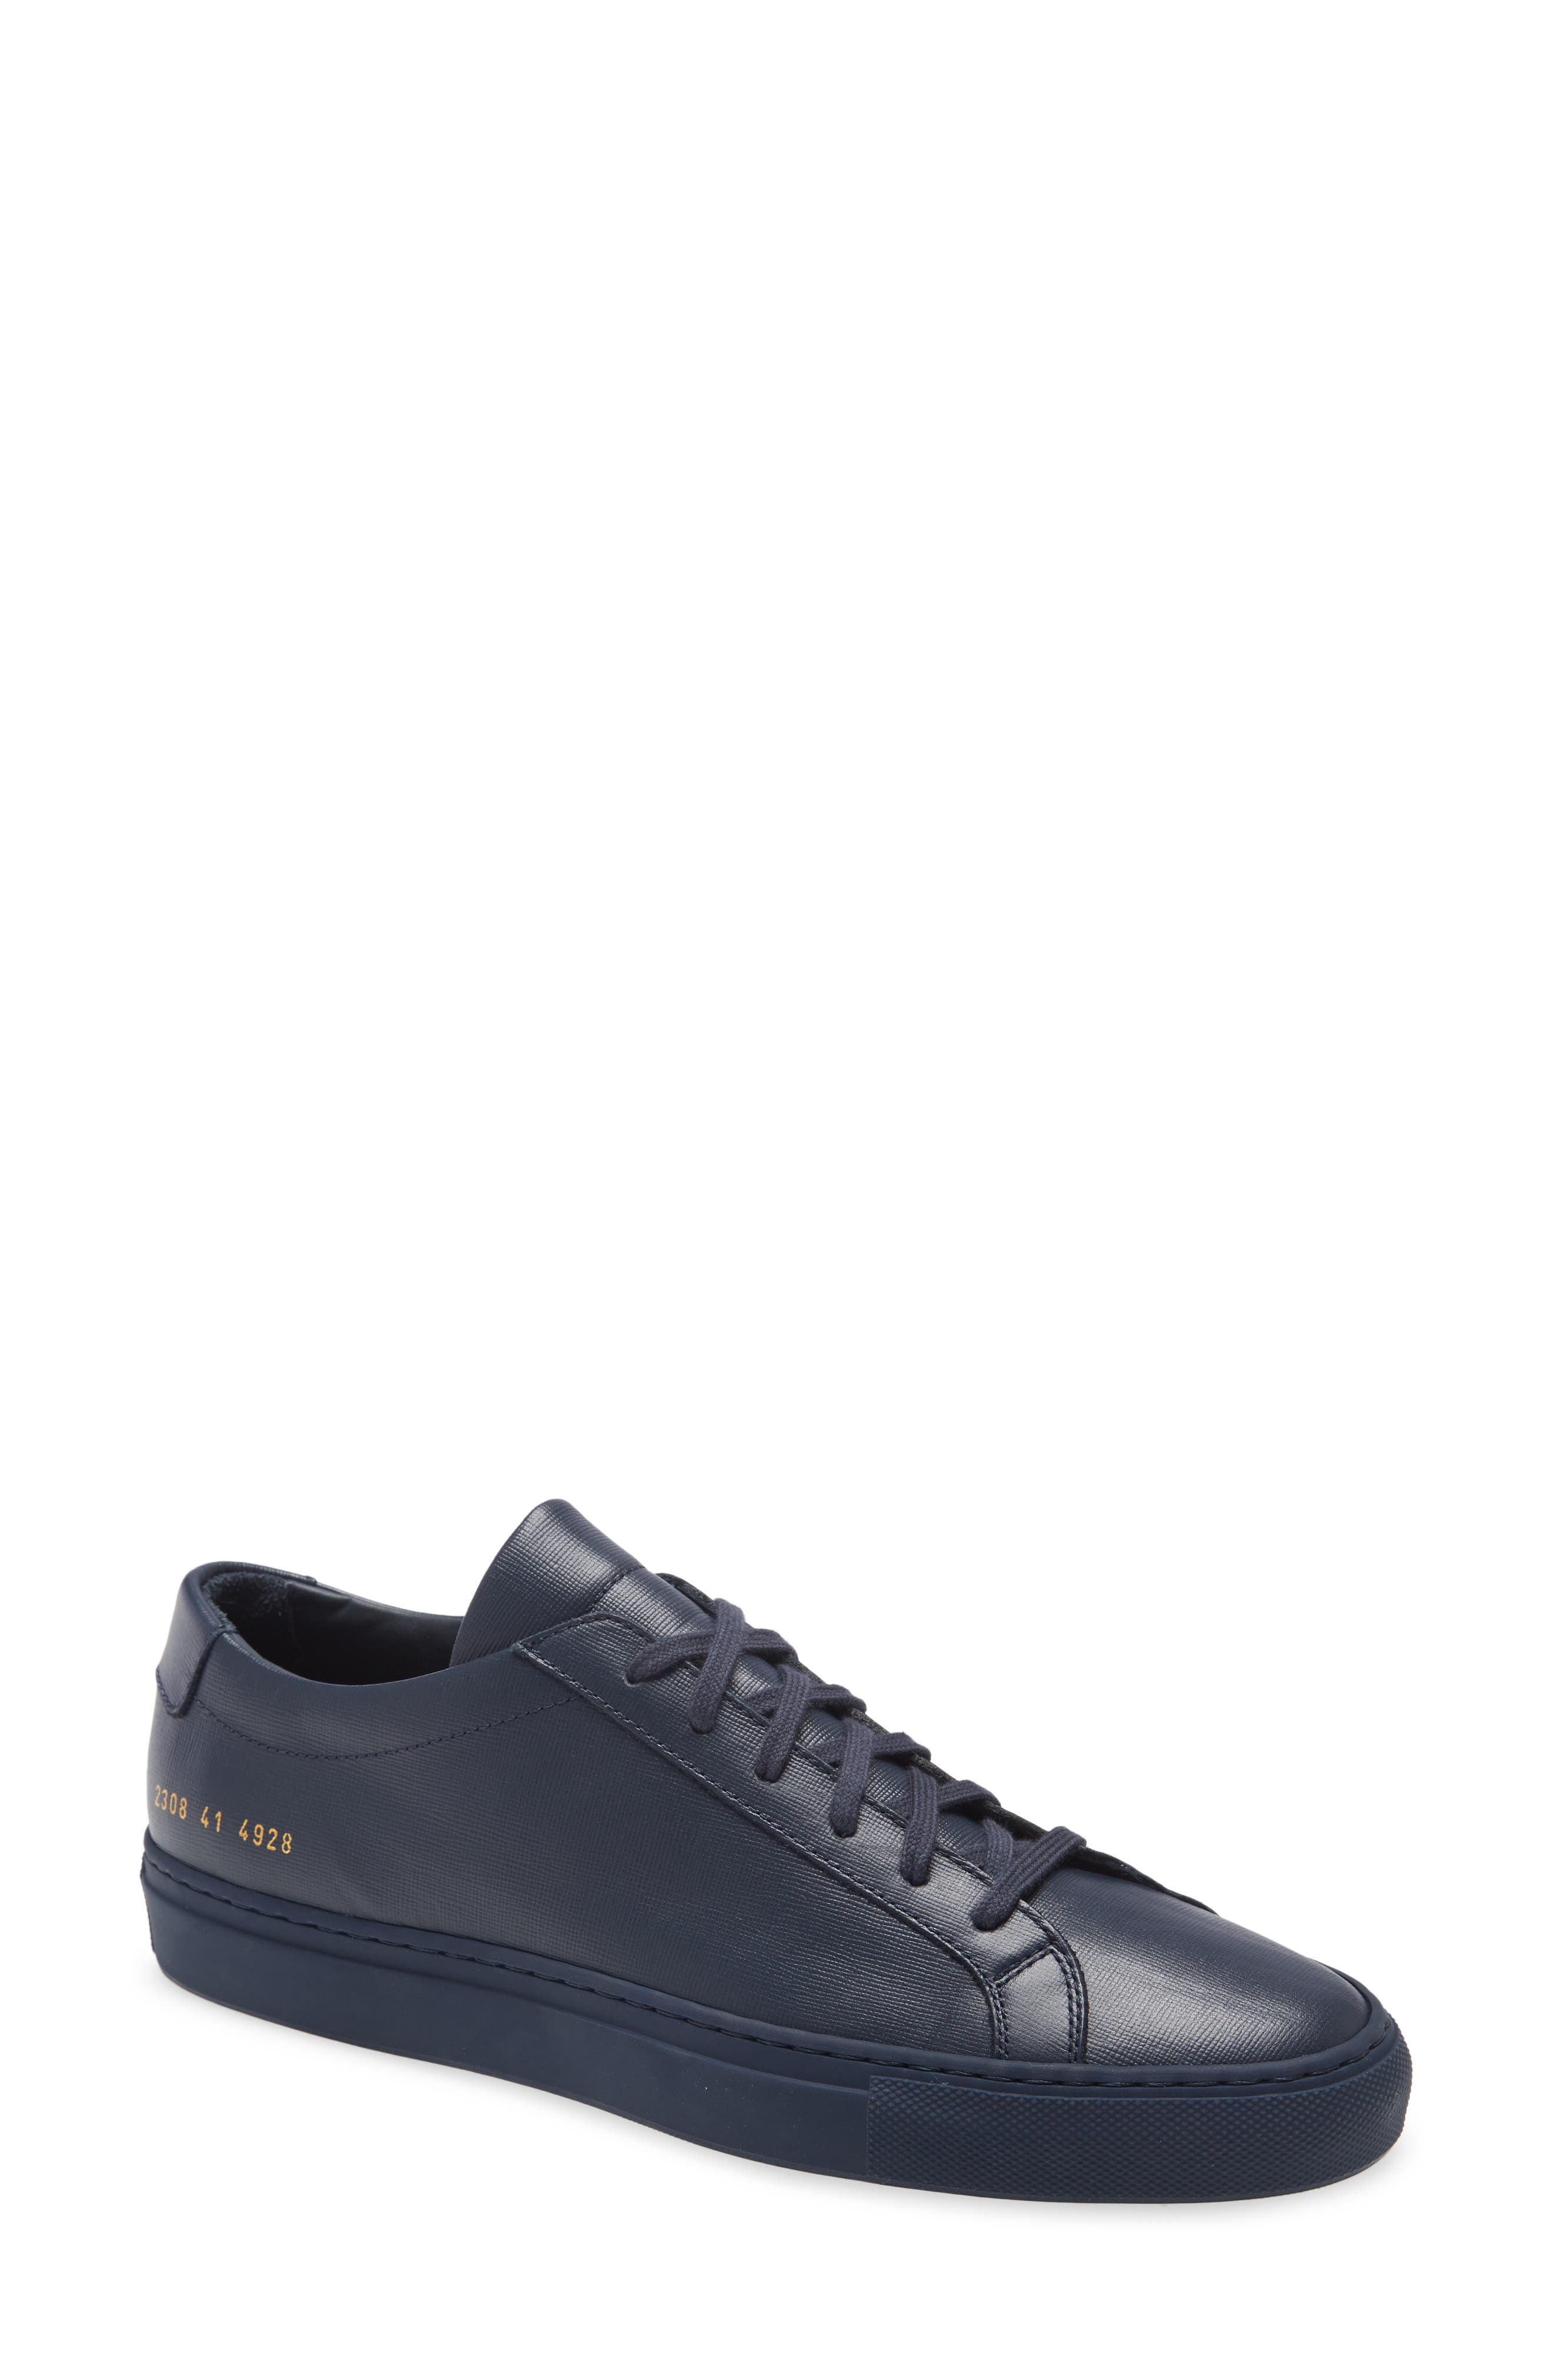 Common Projects Achilles Low Top Sneaker in Navy at Nordstrom, Size 11Us